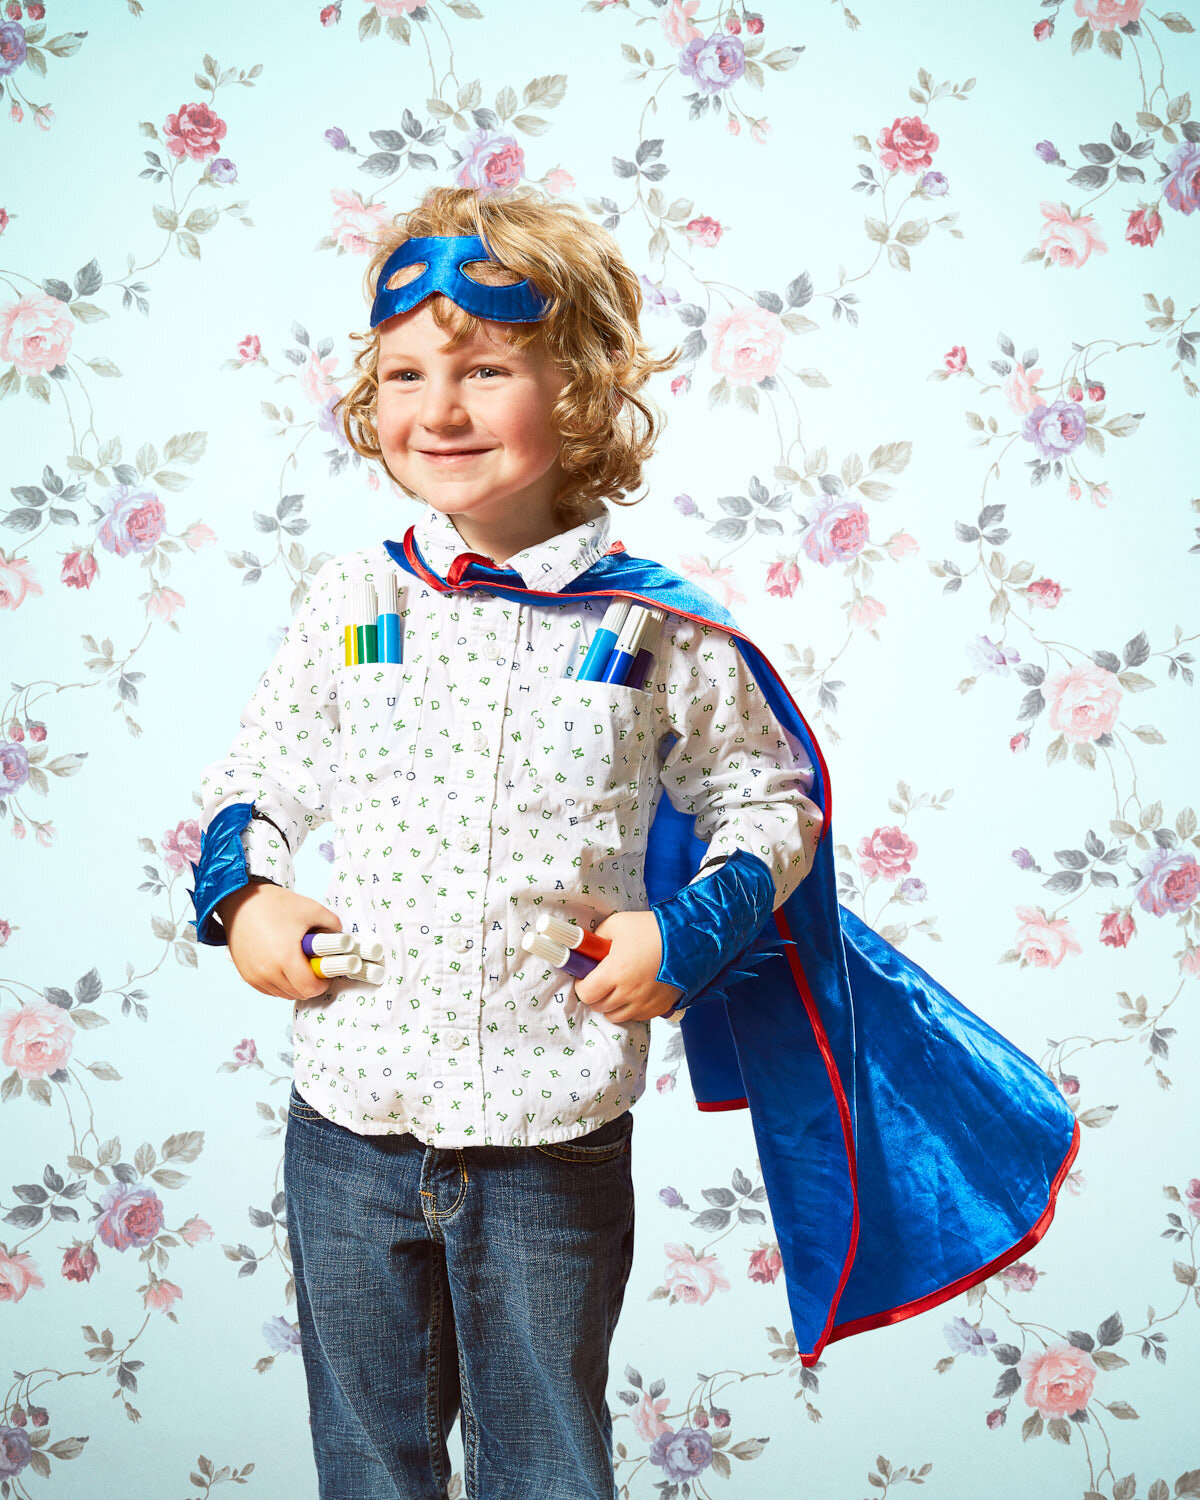 child wearing super hero cape and mask holding markers with vintage floral wallpaper by conceptual portrait photographer Hanna Agar